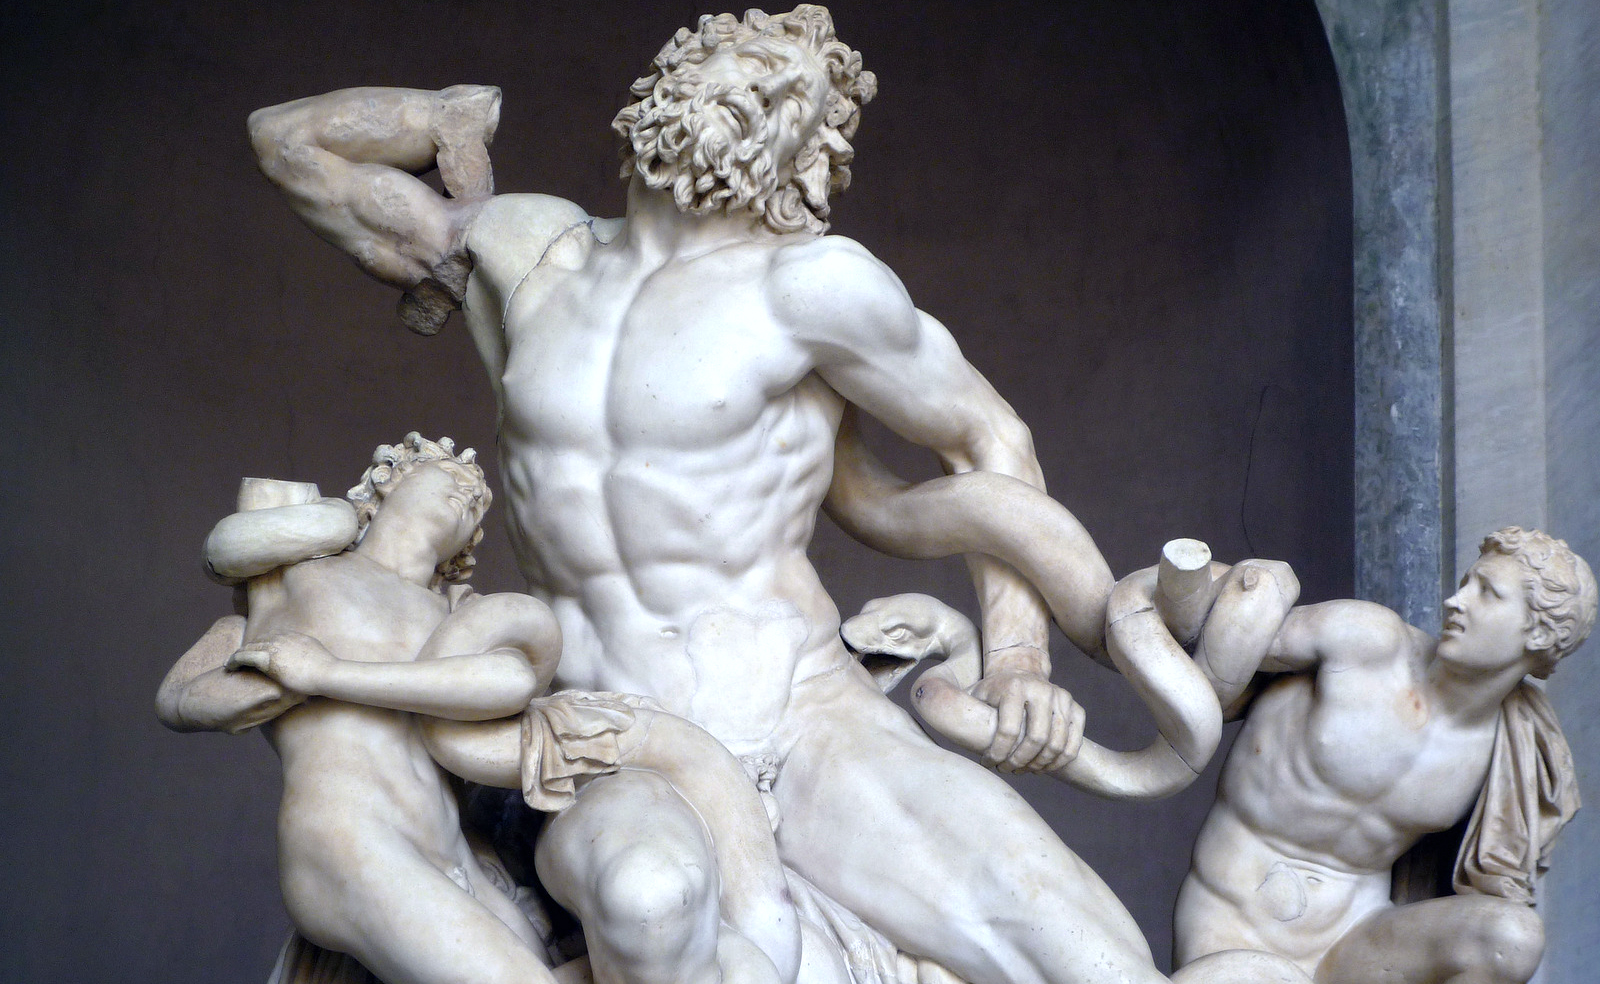 Athanadoros, Hagesandros, and Polydoros of Rhodes, Laocoön and his Sons, early first century C.E., marble, 7'10 1/2" high (Vatican Museums)